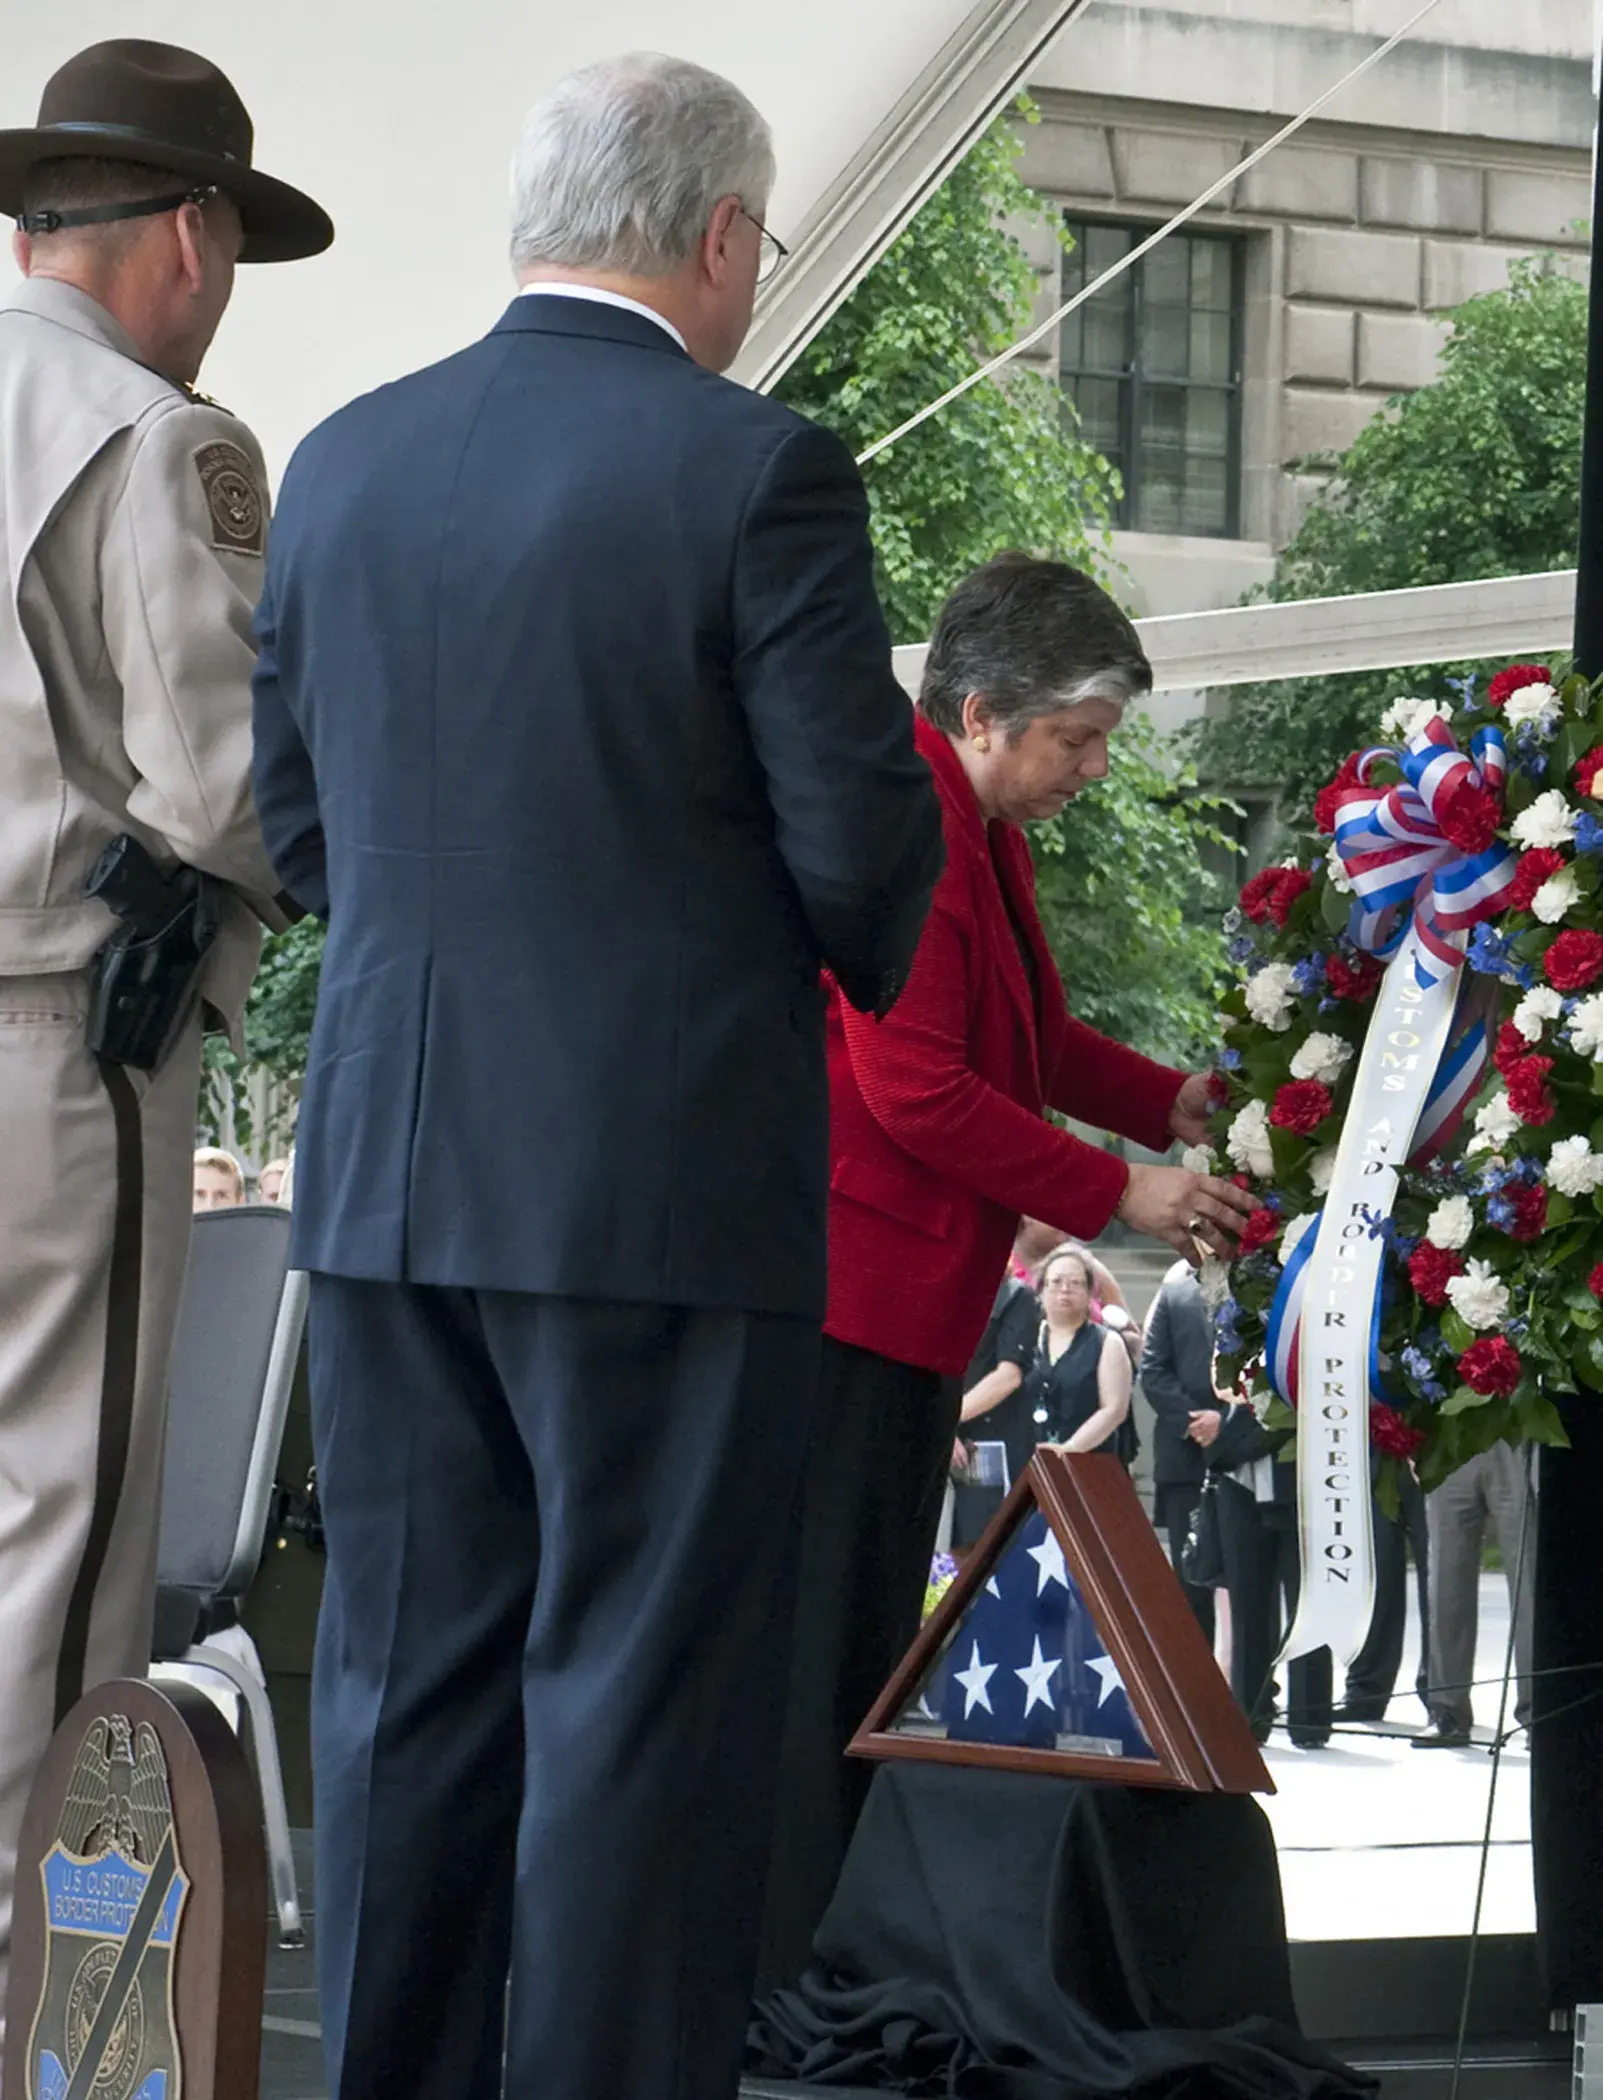 Secretary Napolitano lays a wreath during the CBP Valor Memorial and Wreath Laying Ceremony.